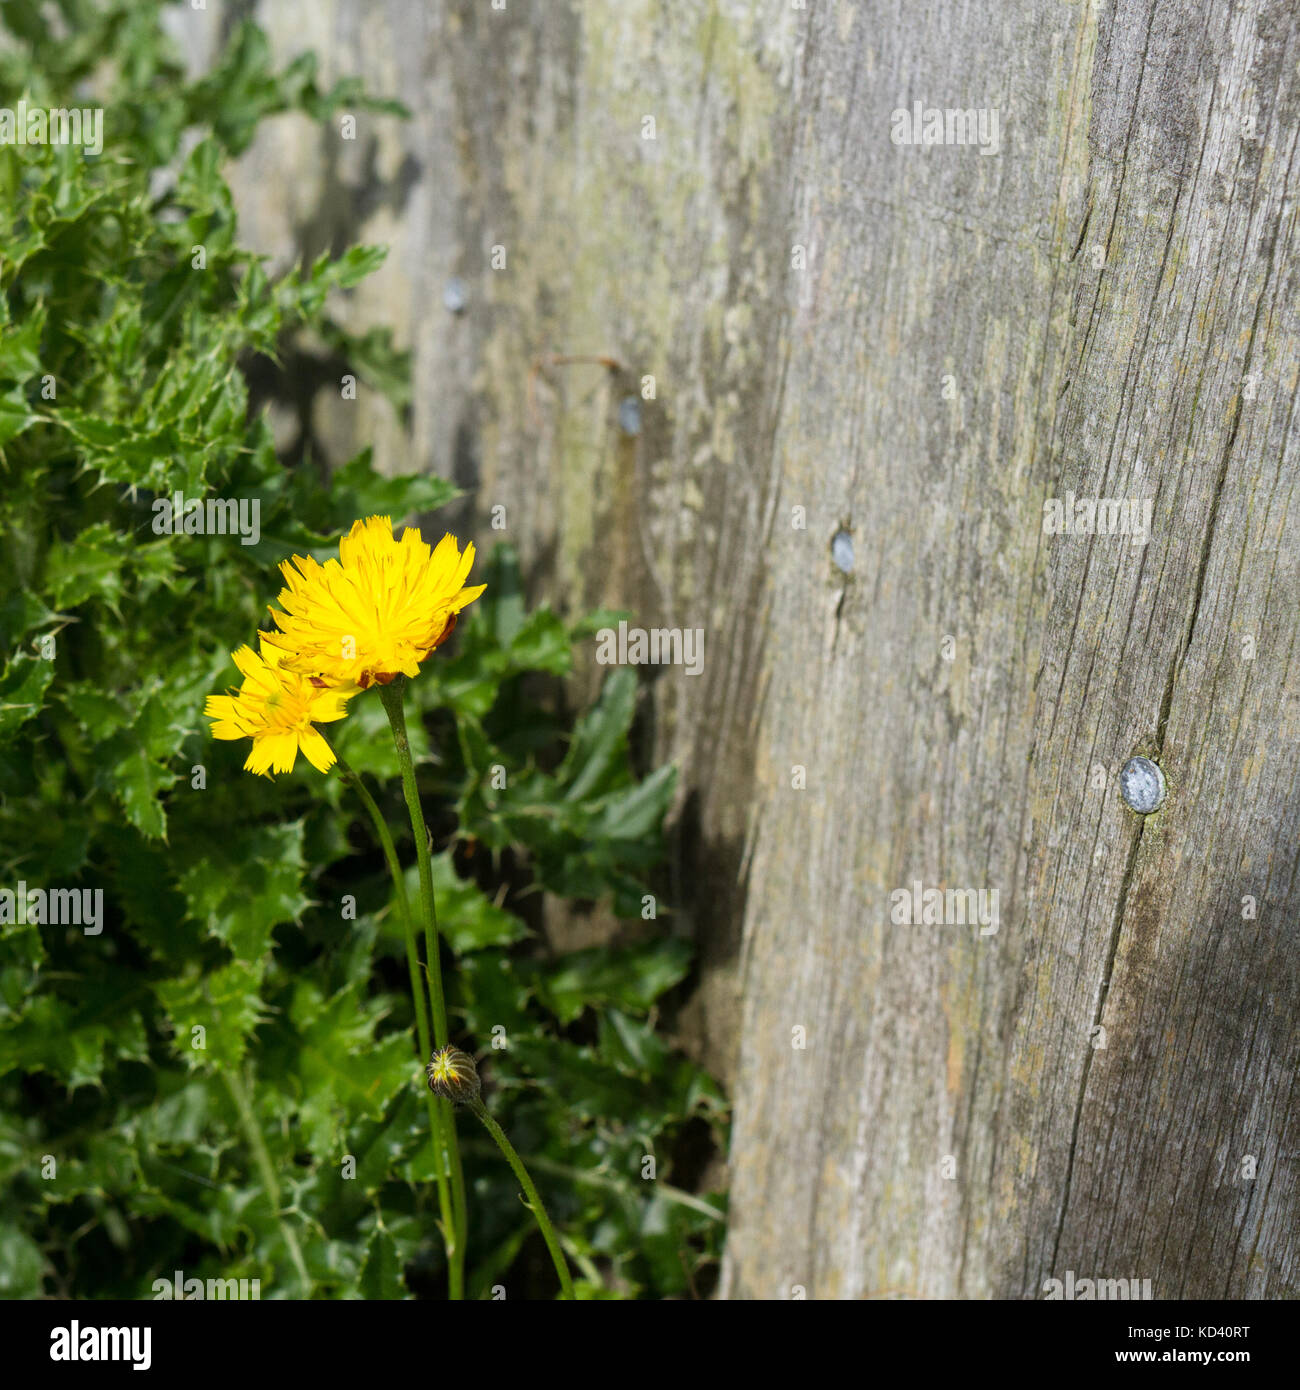 Mouse ear hawkweed (Hieracium pilosella), growing by a garden fence, UK Stock Photo